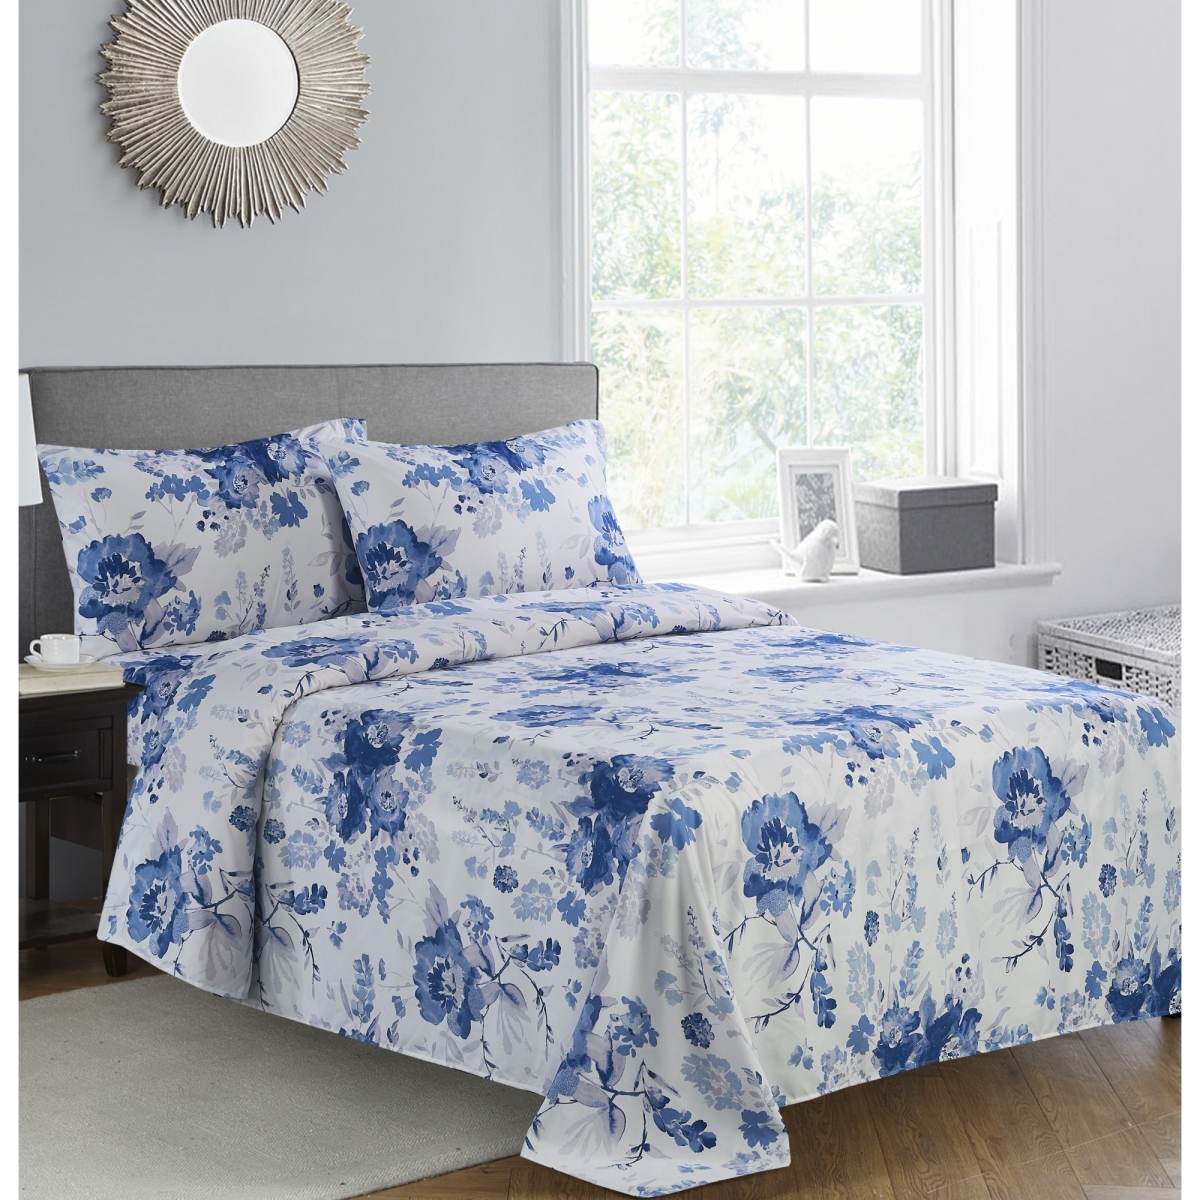 Whtx625-brq Microfiber Sheet Set With Printed Blue Rose, Queen Size - 4 Piece